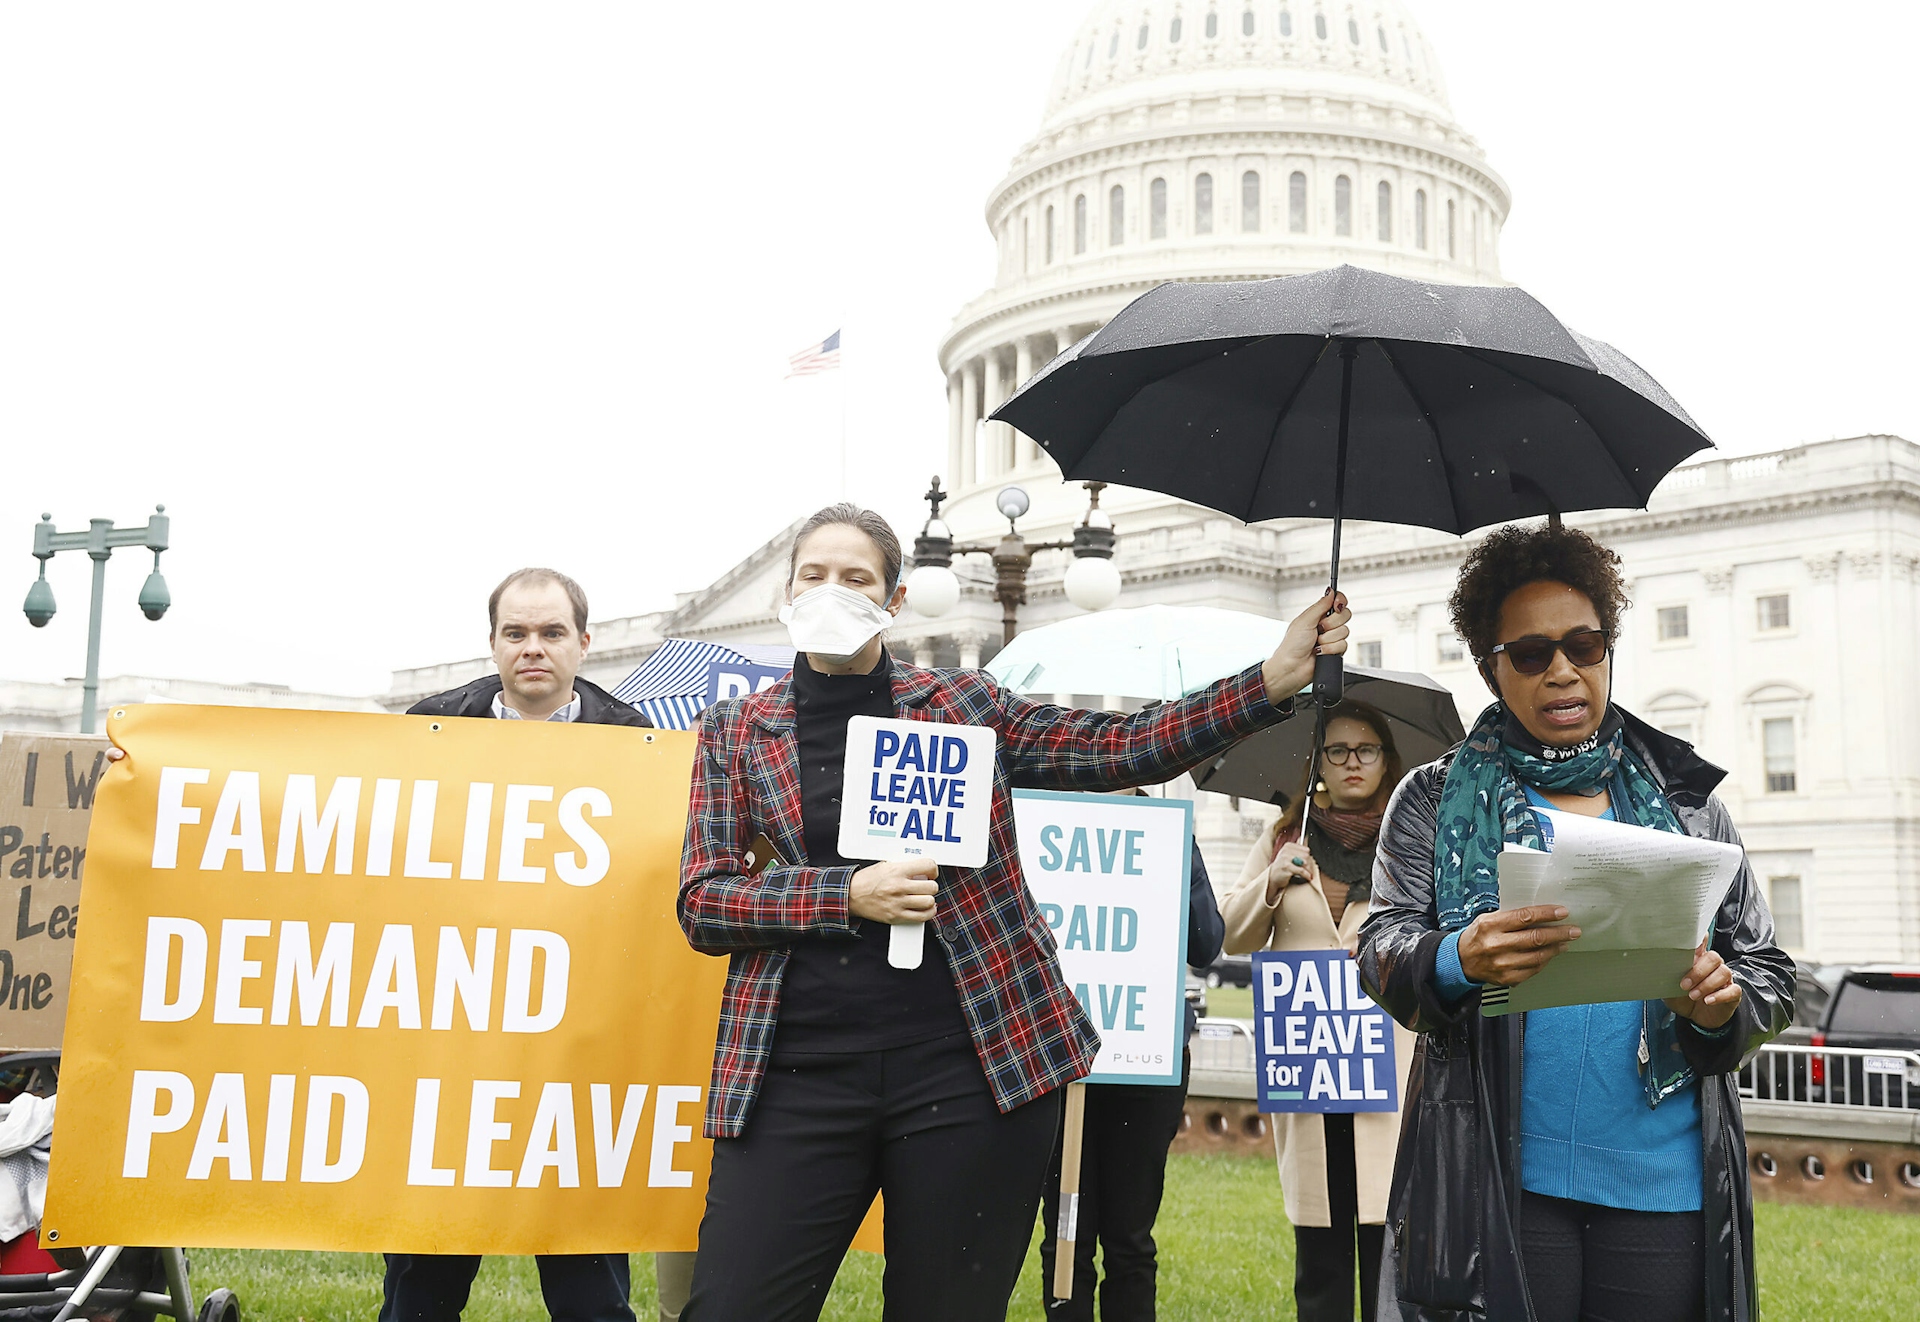 Protesters in support of paid family leave bill